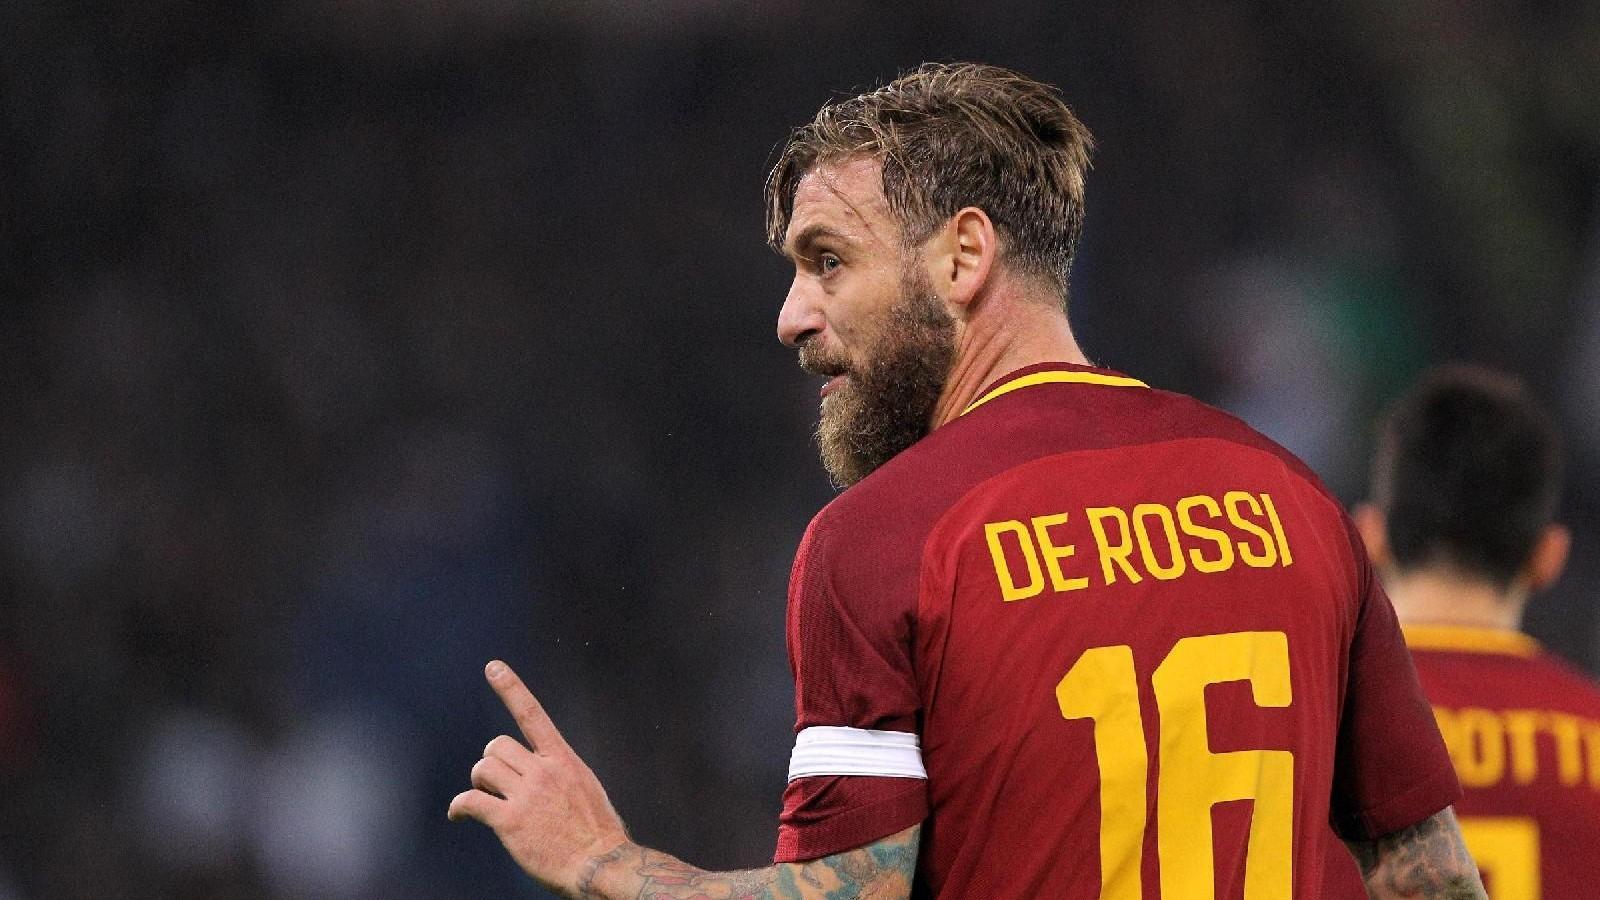 De Rossi: Liverpool plays good football, but we will have our chances